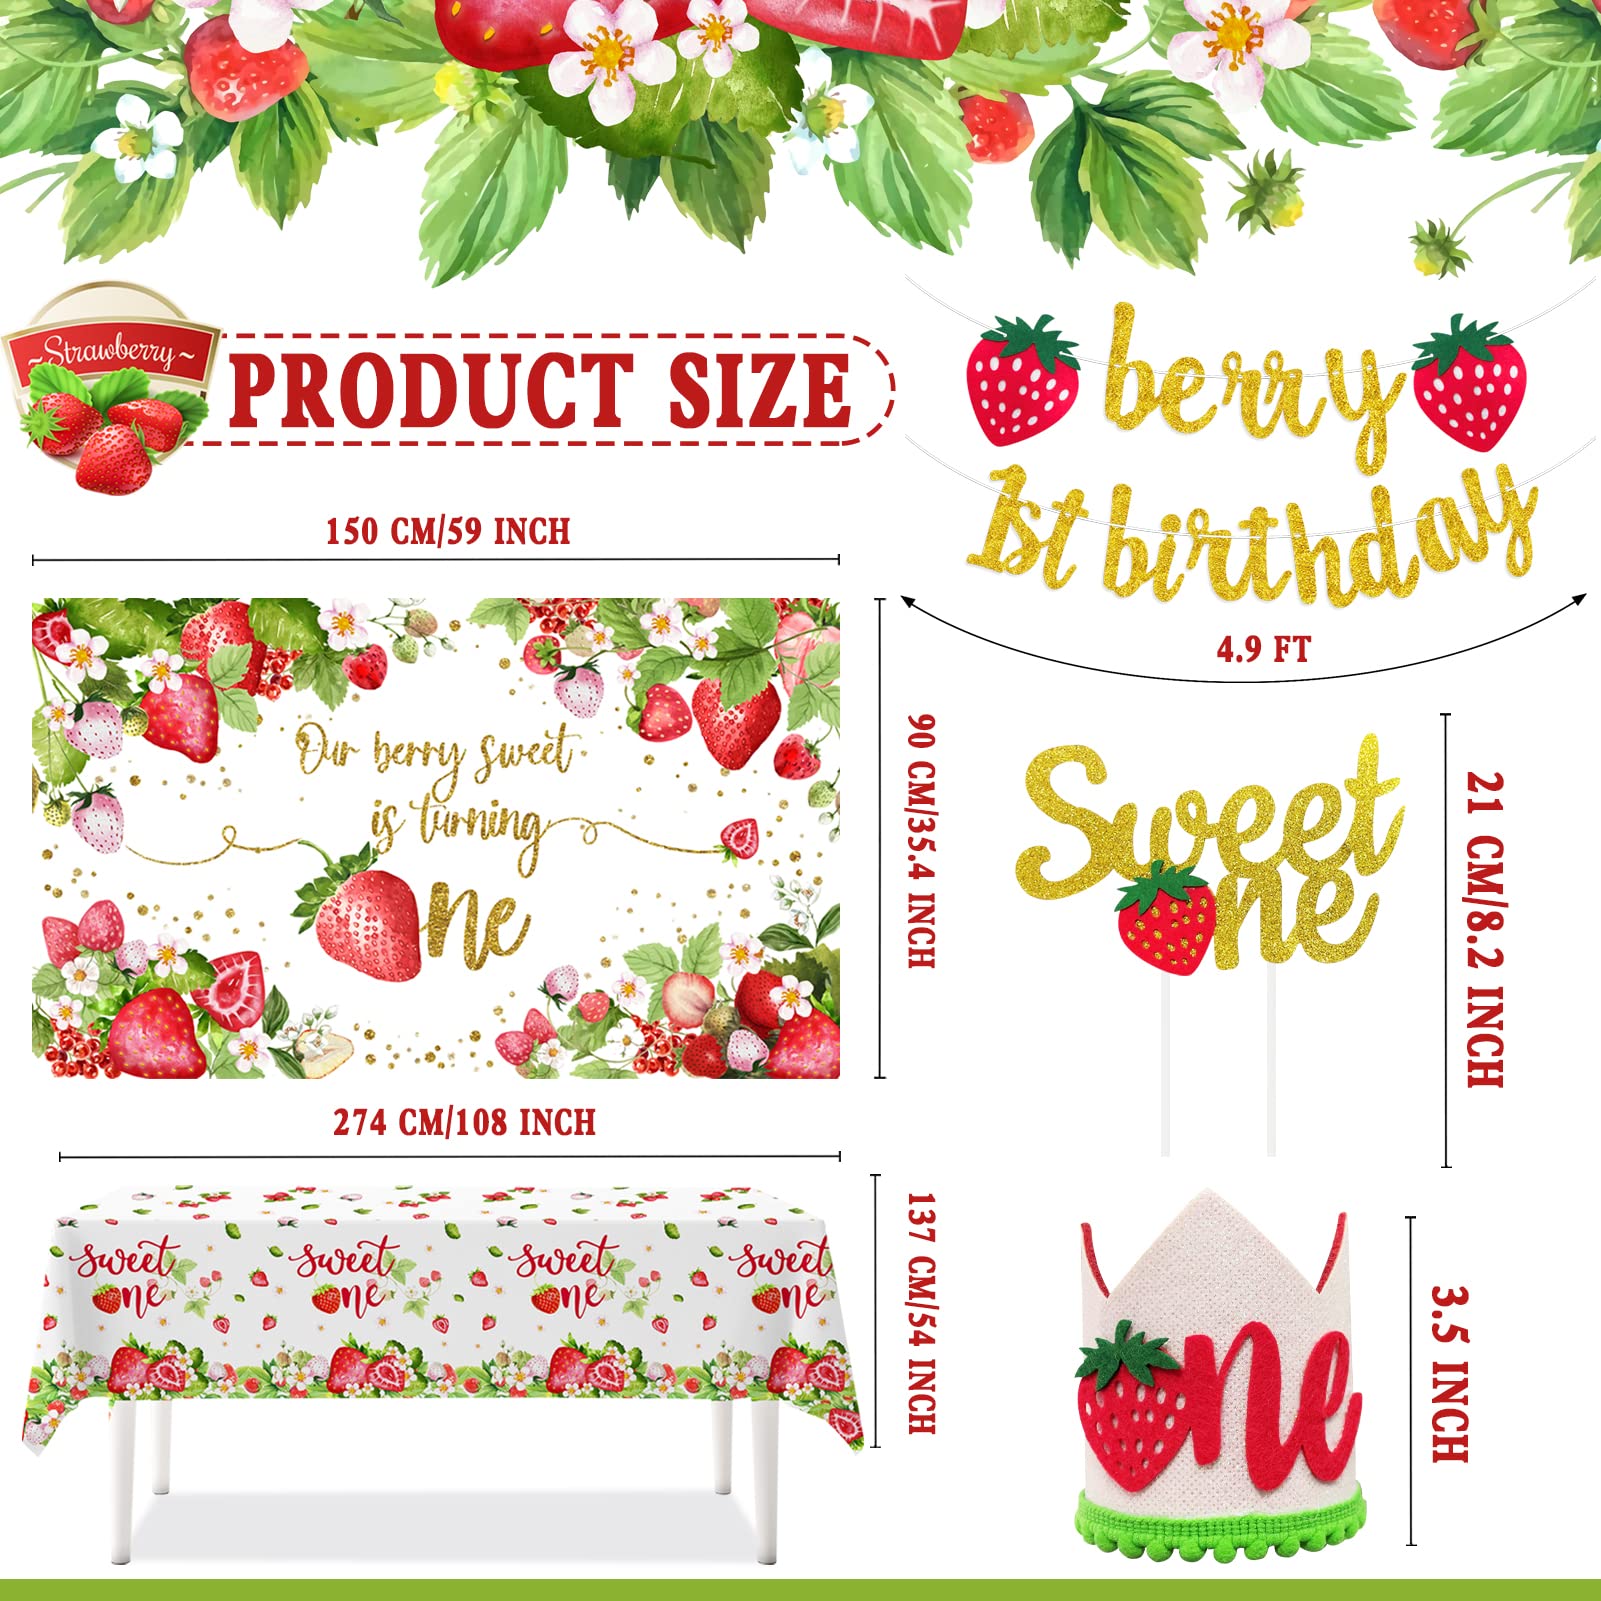 Strawberry First Birthday Party Decoration Pack for Girls Sweet One Shortcake Party Supplies 84 Pcs (Backdrop, Tablecloth, Banner, Crown, Cupcake Toppers, Honeycomb Decor, Balloons) (Sweet One)